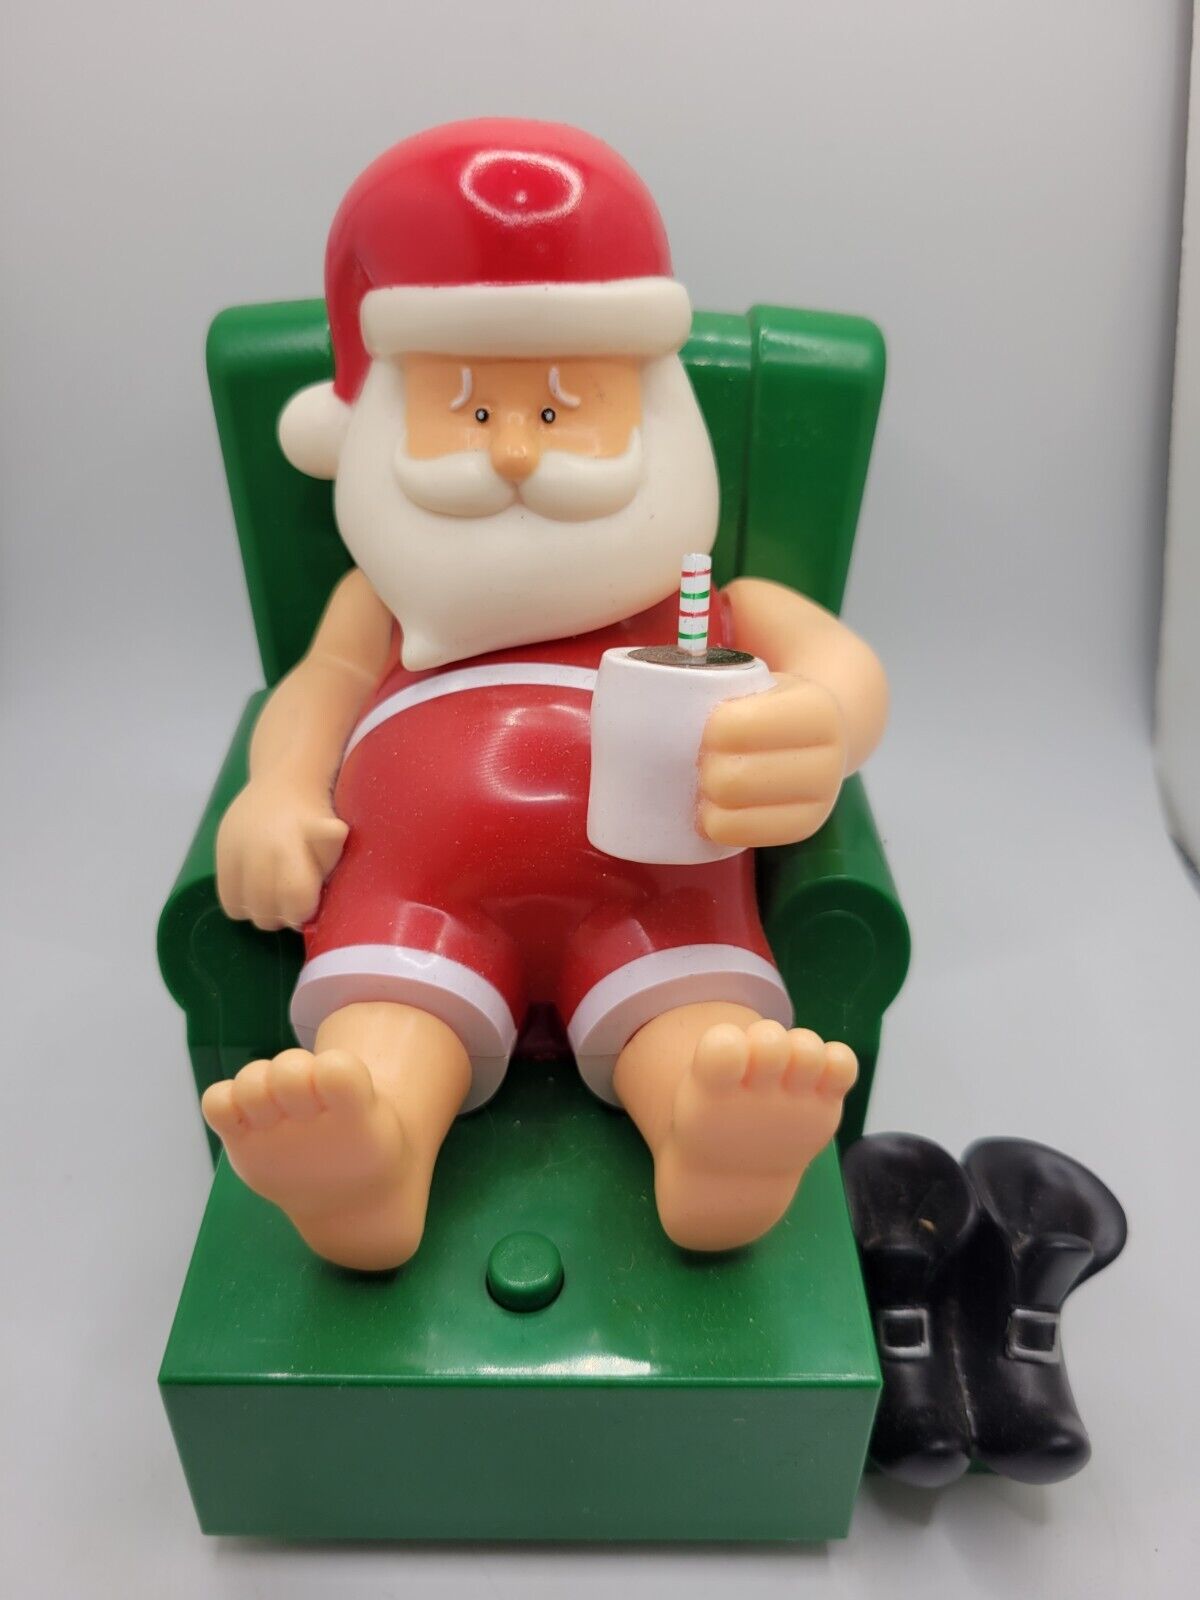 Gemmy Animated Talking Complaining Santa Sitting in Recliner Animated Arm / Head